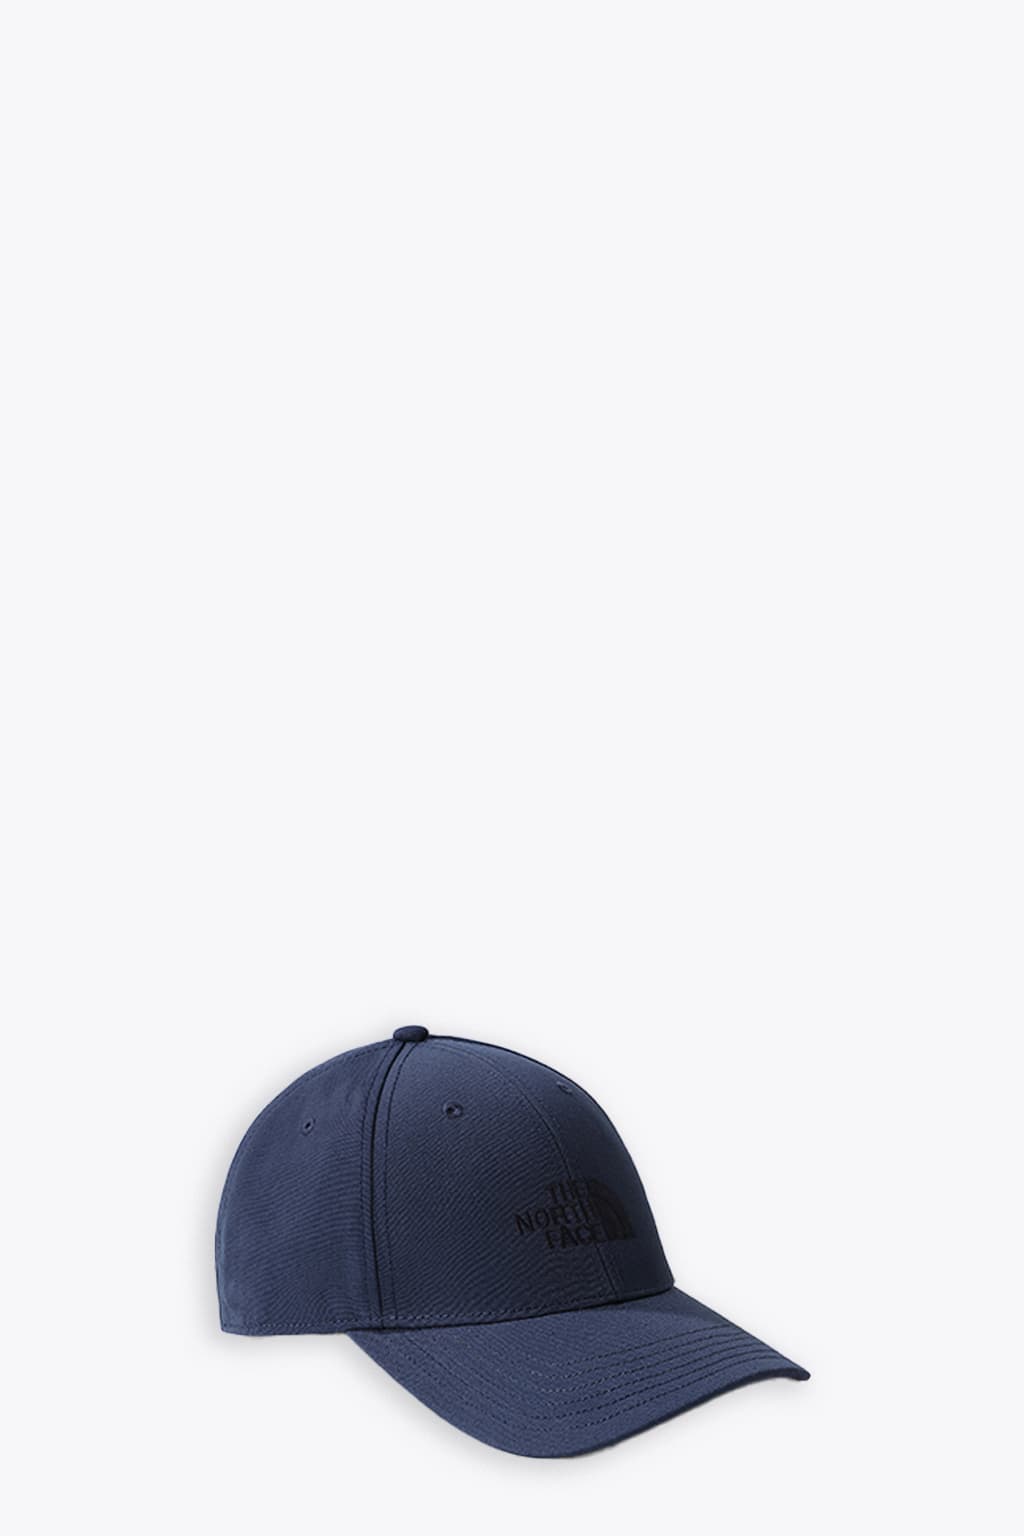 The North Face Hat Logo - Recycled Closet 66 Smart Cap With 66 Blue | Classic Recycled Classic Embroidery Hat